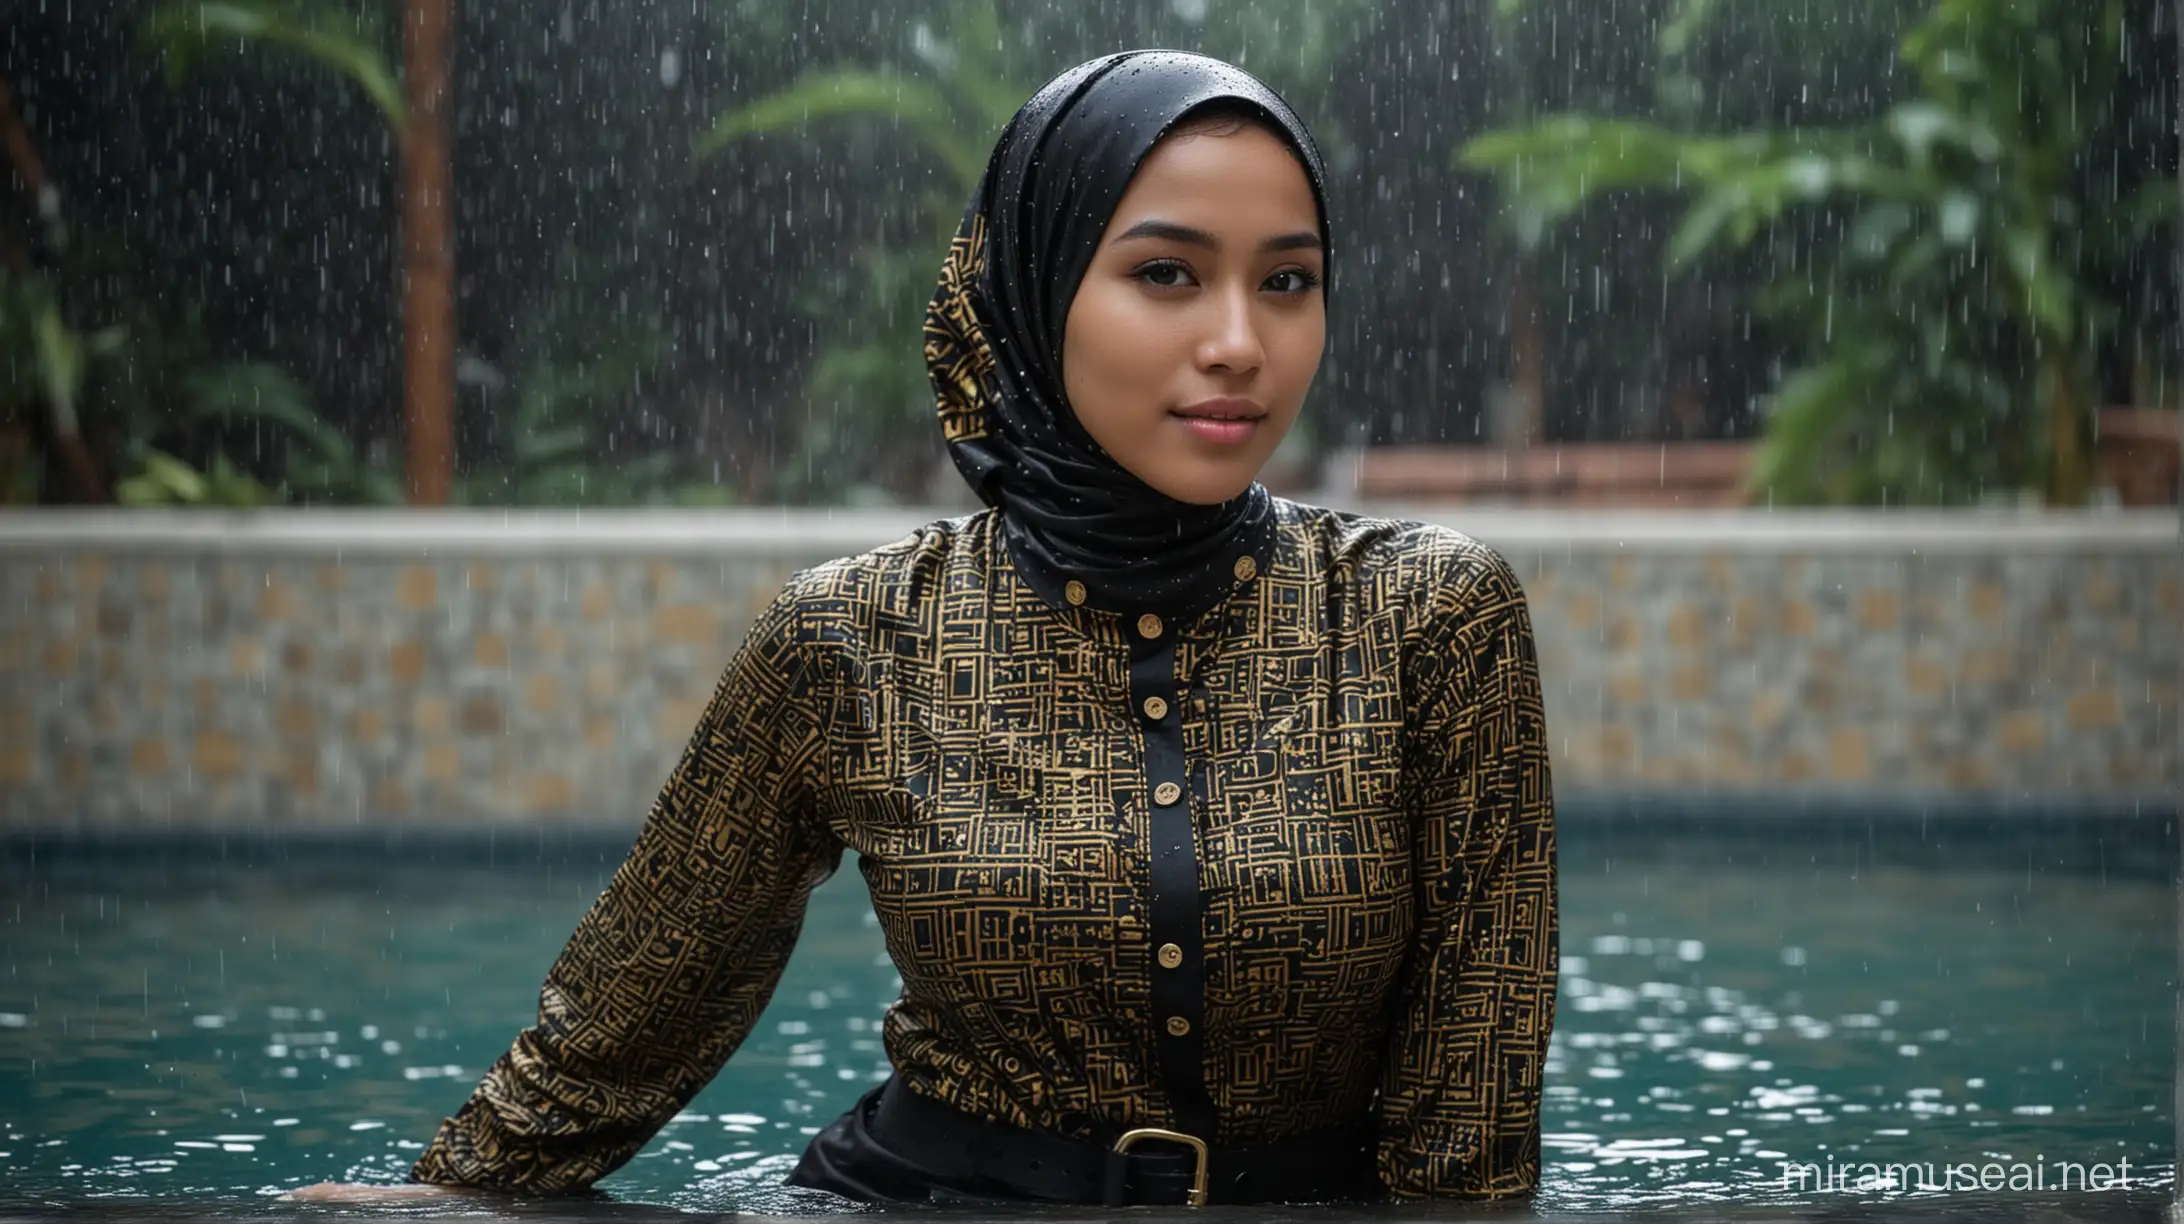 18 years old woman, indonesian, makeup, tight fit long sleeves buttoned black-gold geometric print shirt, black long pants with belt, hijab, heavy downpour rain, in the swimming pool, dripping wet, poolside, smirk, at night, low light, close-up portrait